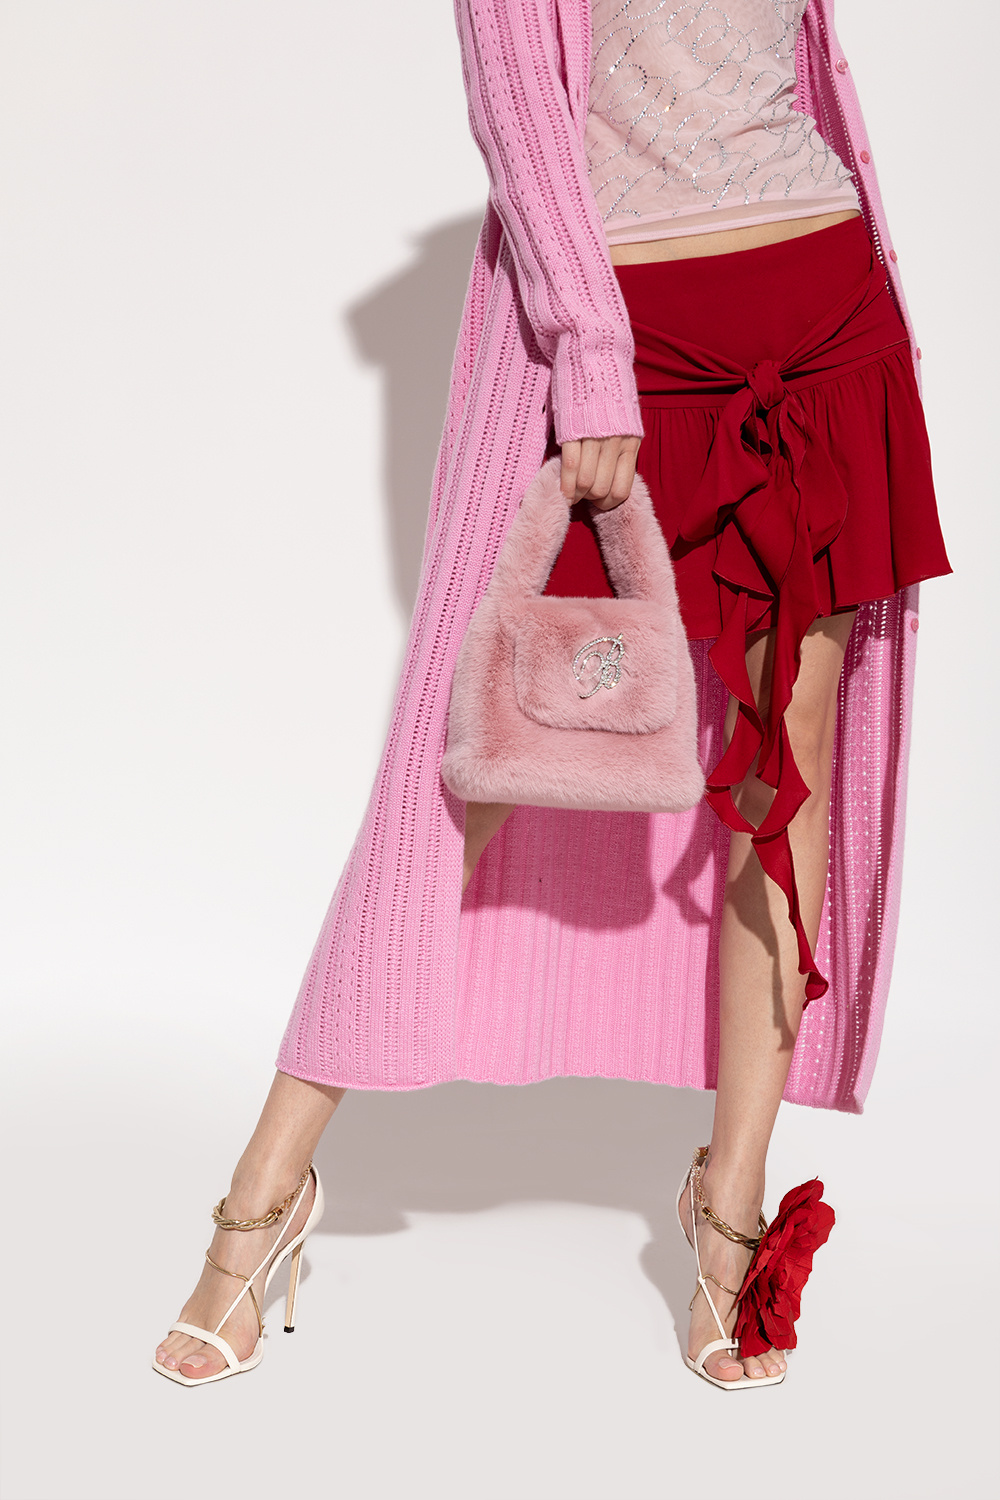 Blumarine Not a fan of these particular bags